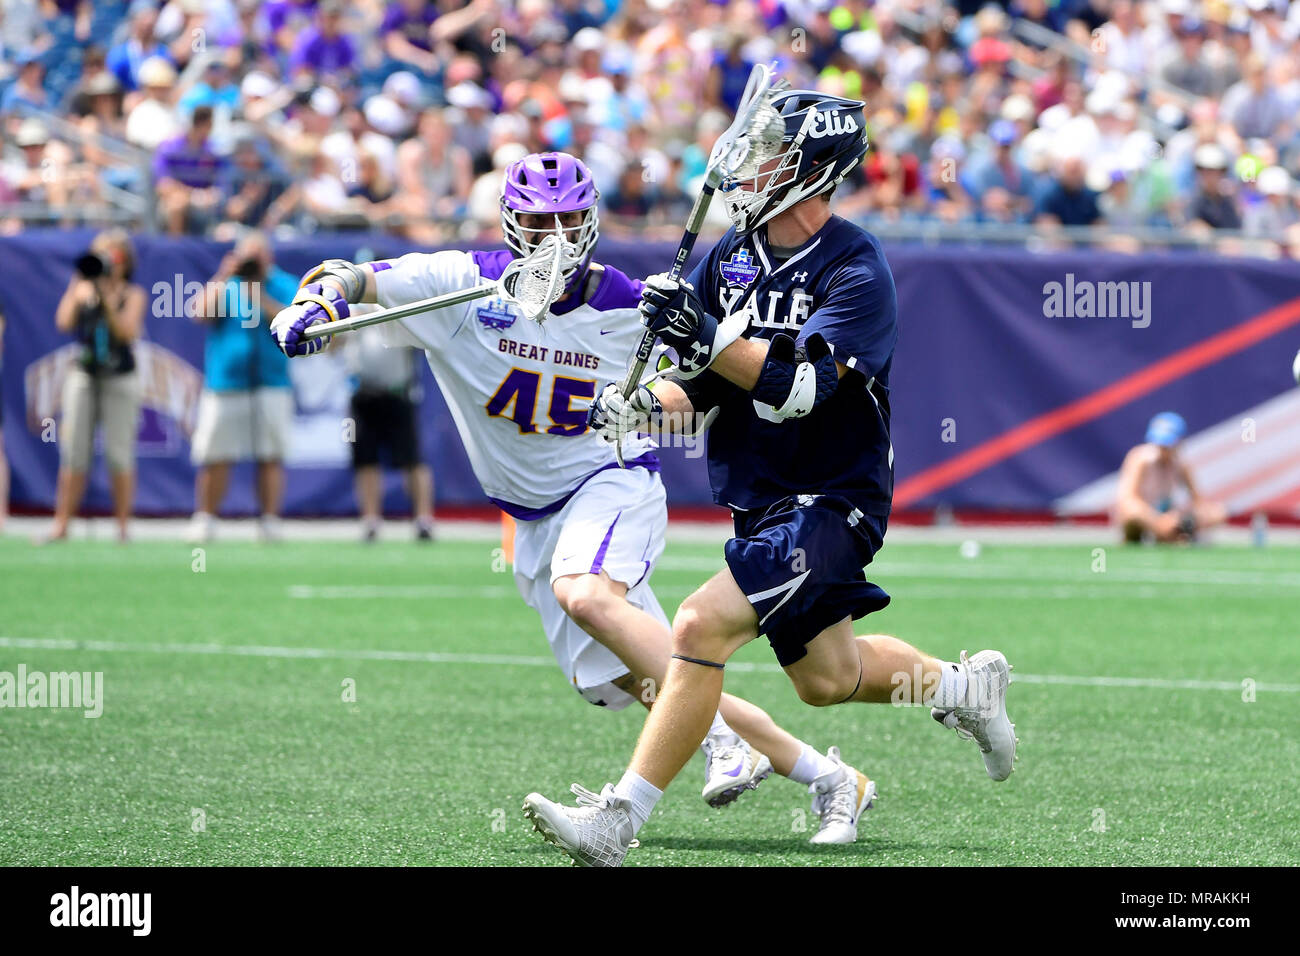 Foxborough, Mass. 26th May, 2018. Albany Great Danes defender AJ Kluck (45) tries to check Yale Bulldogs attackman Lucas Cotler (9) during the NCAA Division I Lacrosse semi final between Yale and Albany, held at Gillette Stadium, in Foxborough, Mass. Yale defeats Albany 20-11. Eric Canha/CSM/Alamy Live News Stock Photo